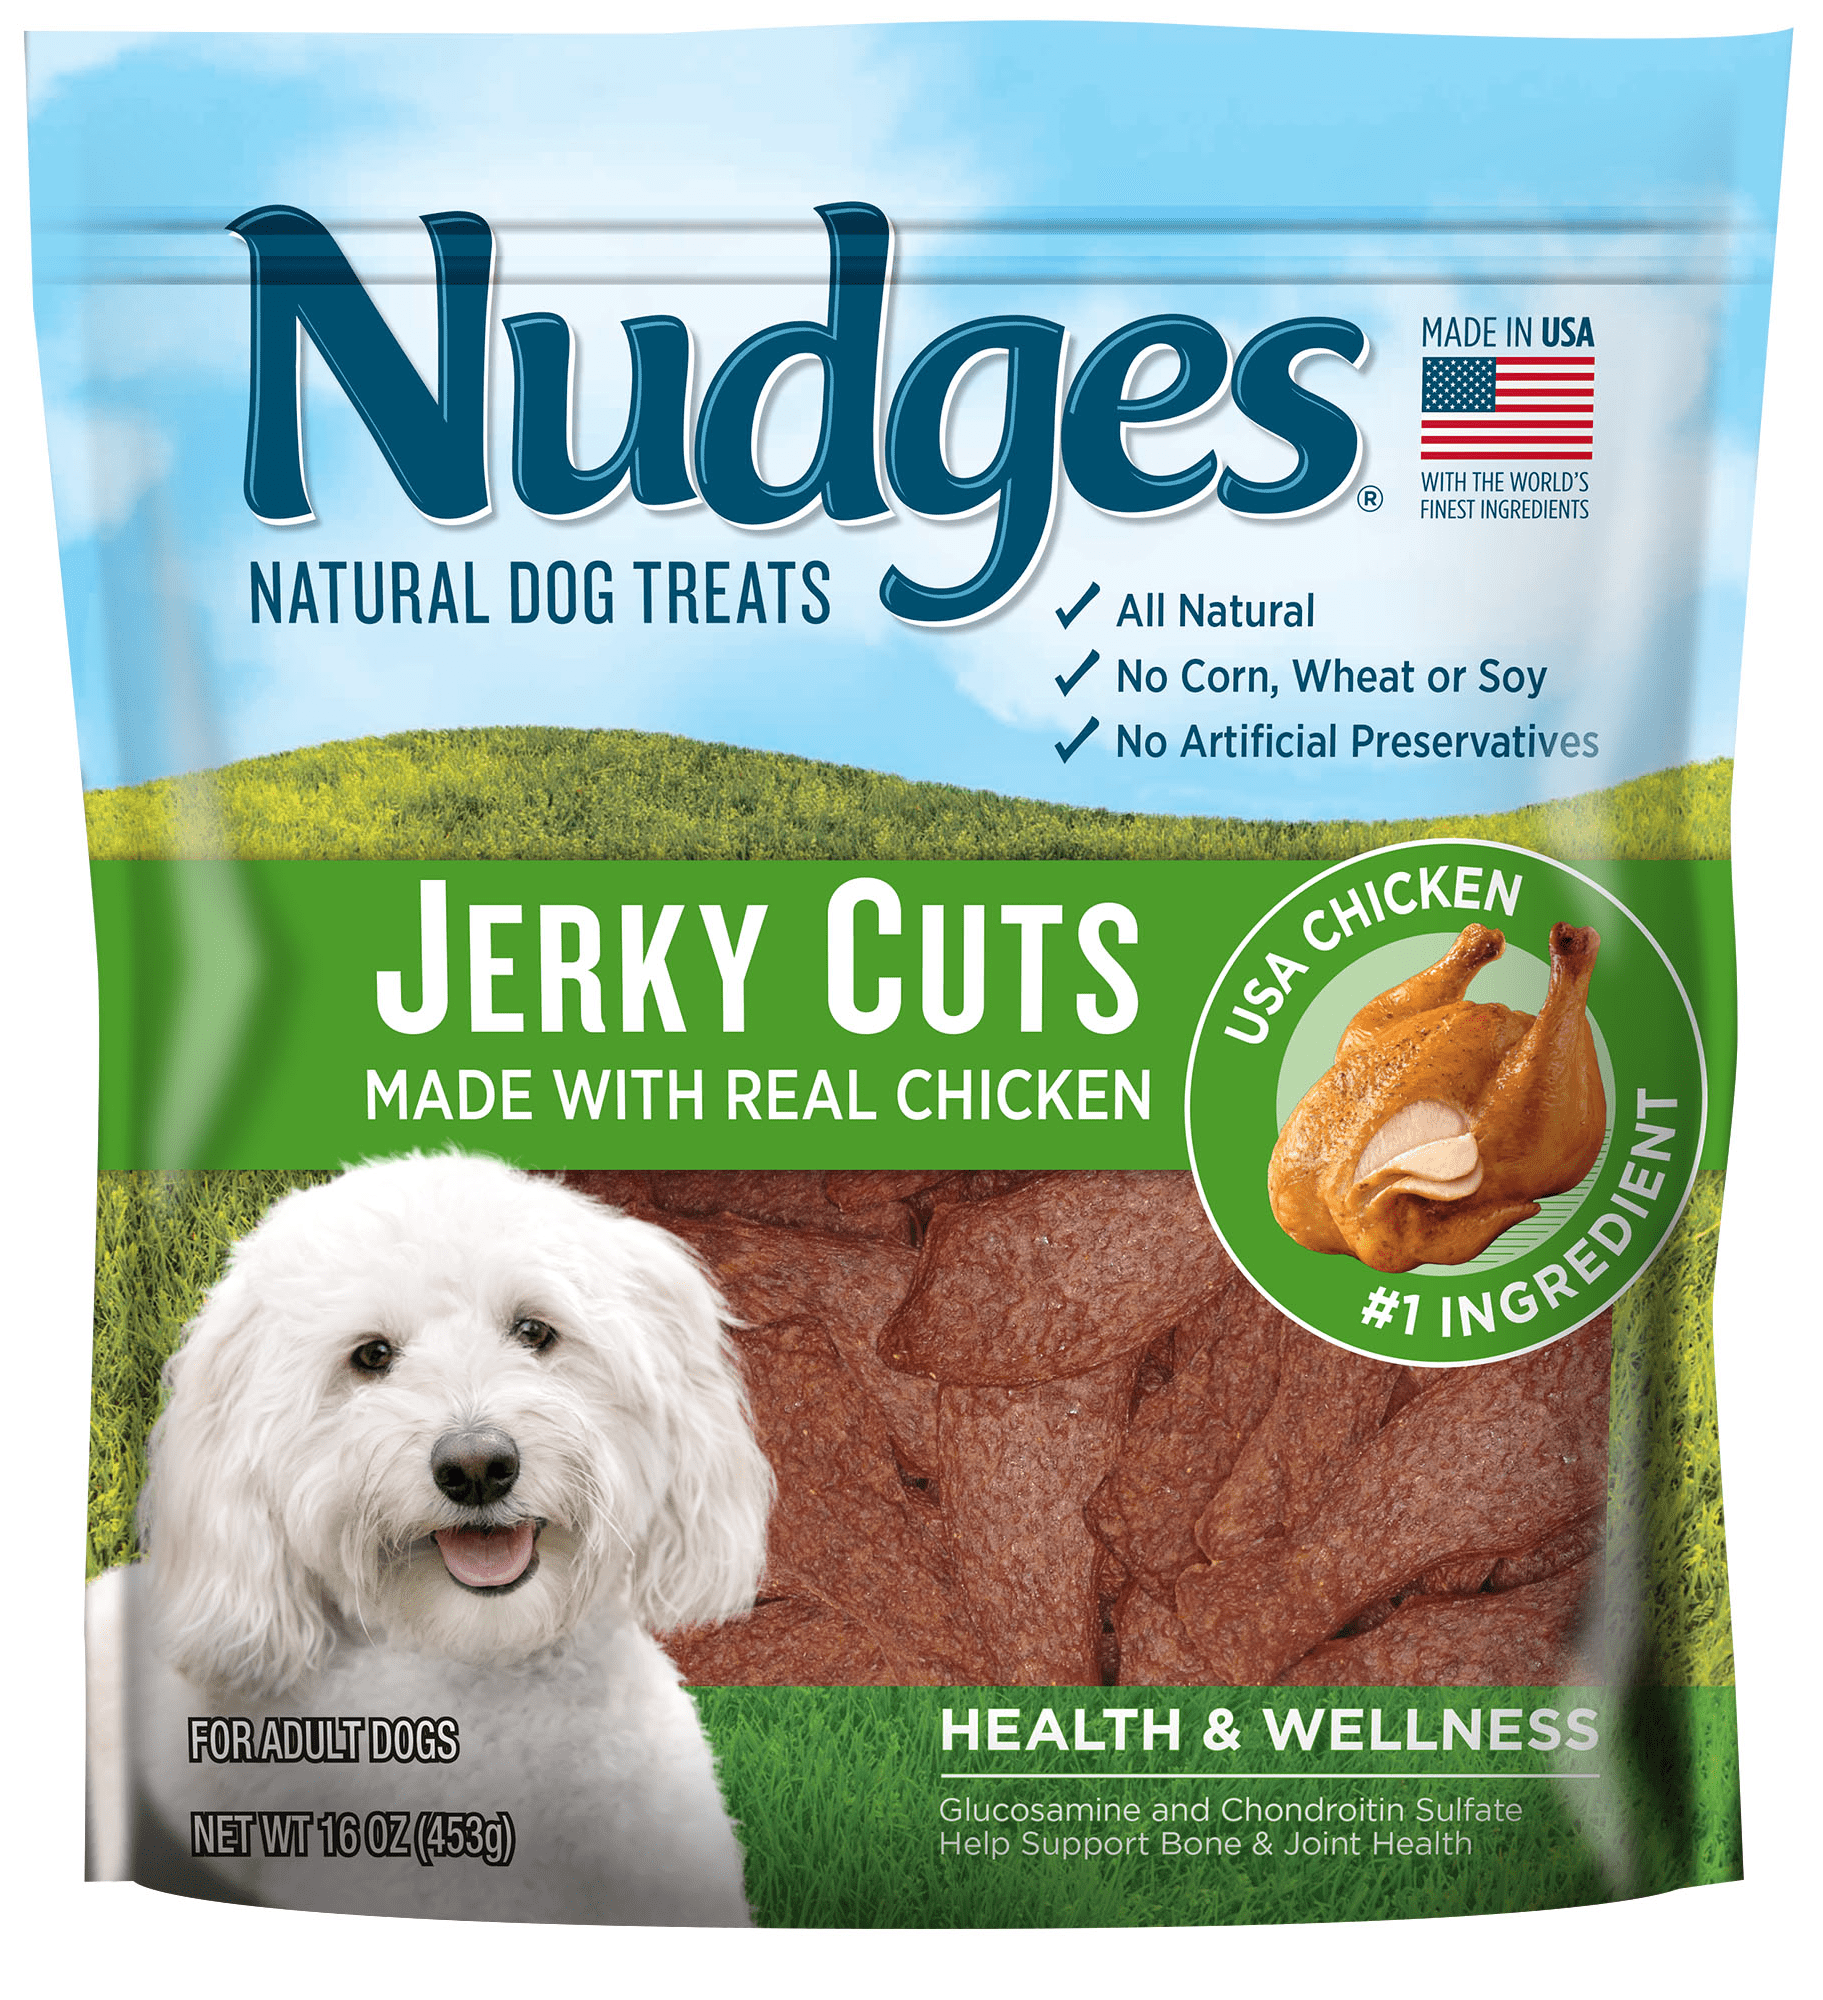 Nudges Health and Wellness Chicken 